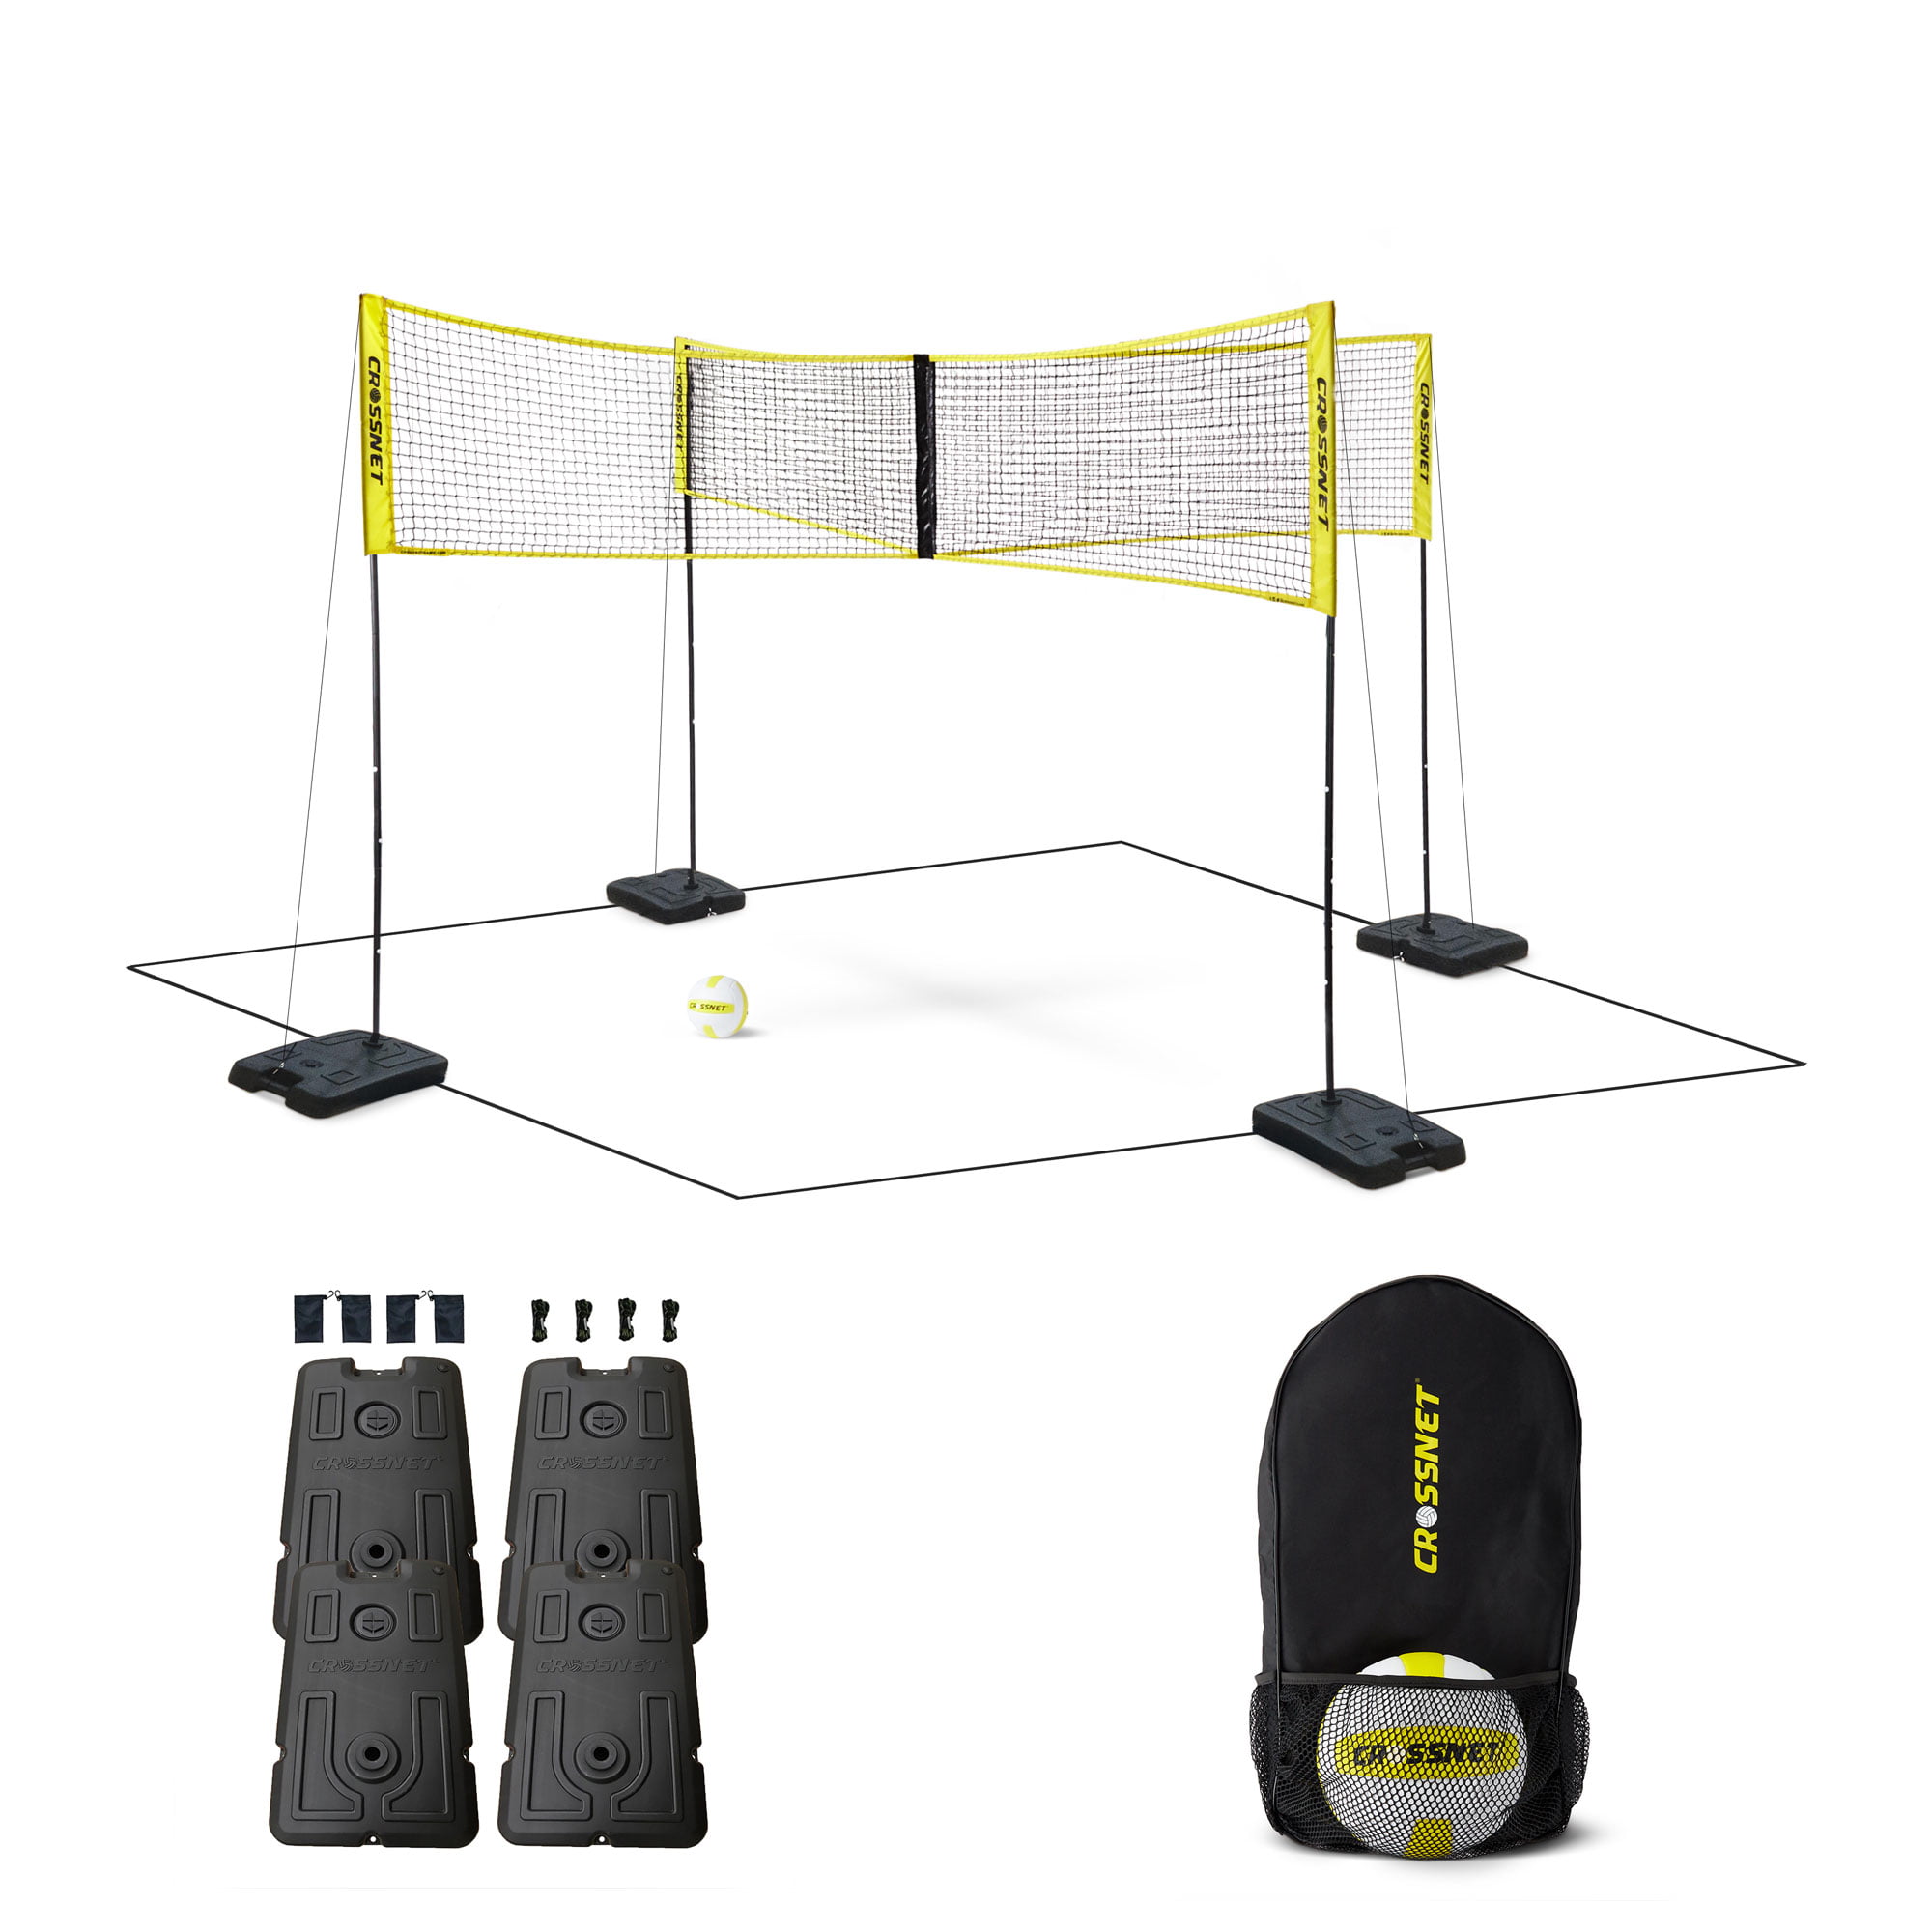 CROSSNET's Portable Four Square Game & Ball - Play Classic 4 Square  Anywhere - Quick and Easy Setup - Outdoor & Backyard Yard Games & Gifts for  Adults